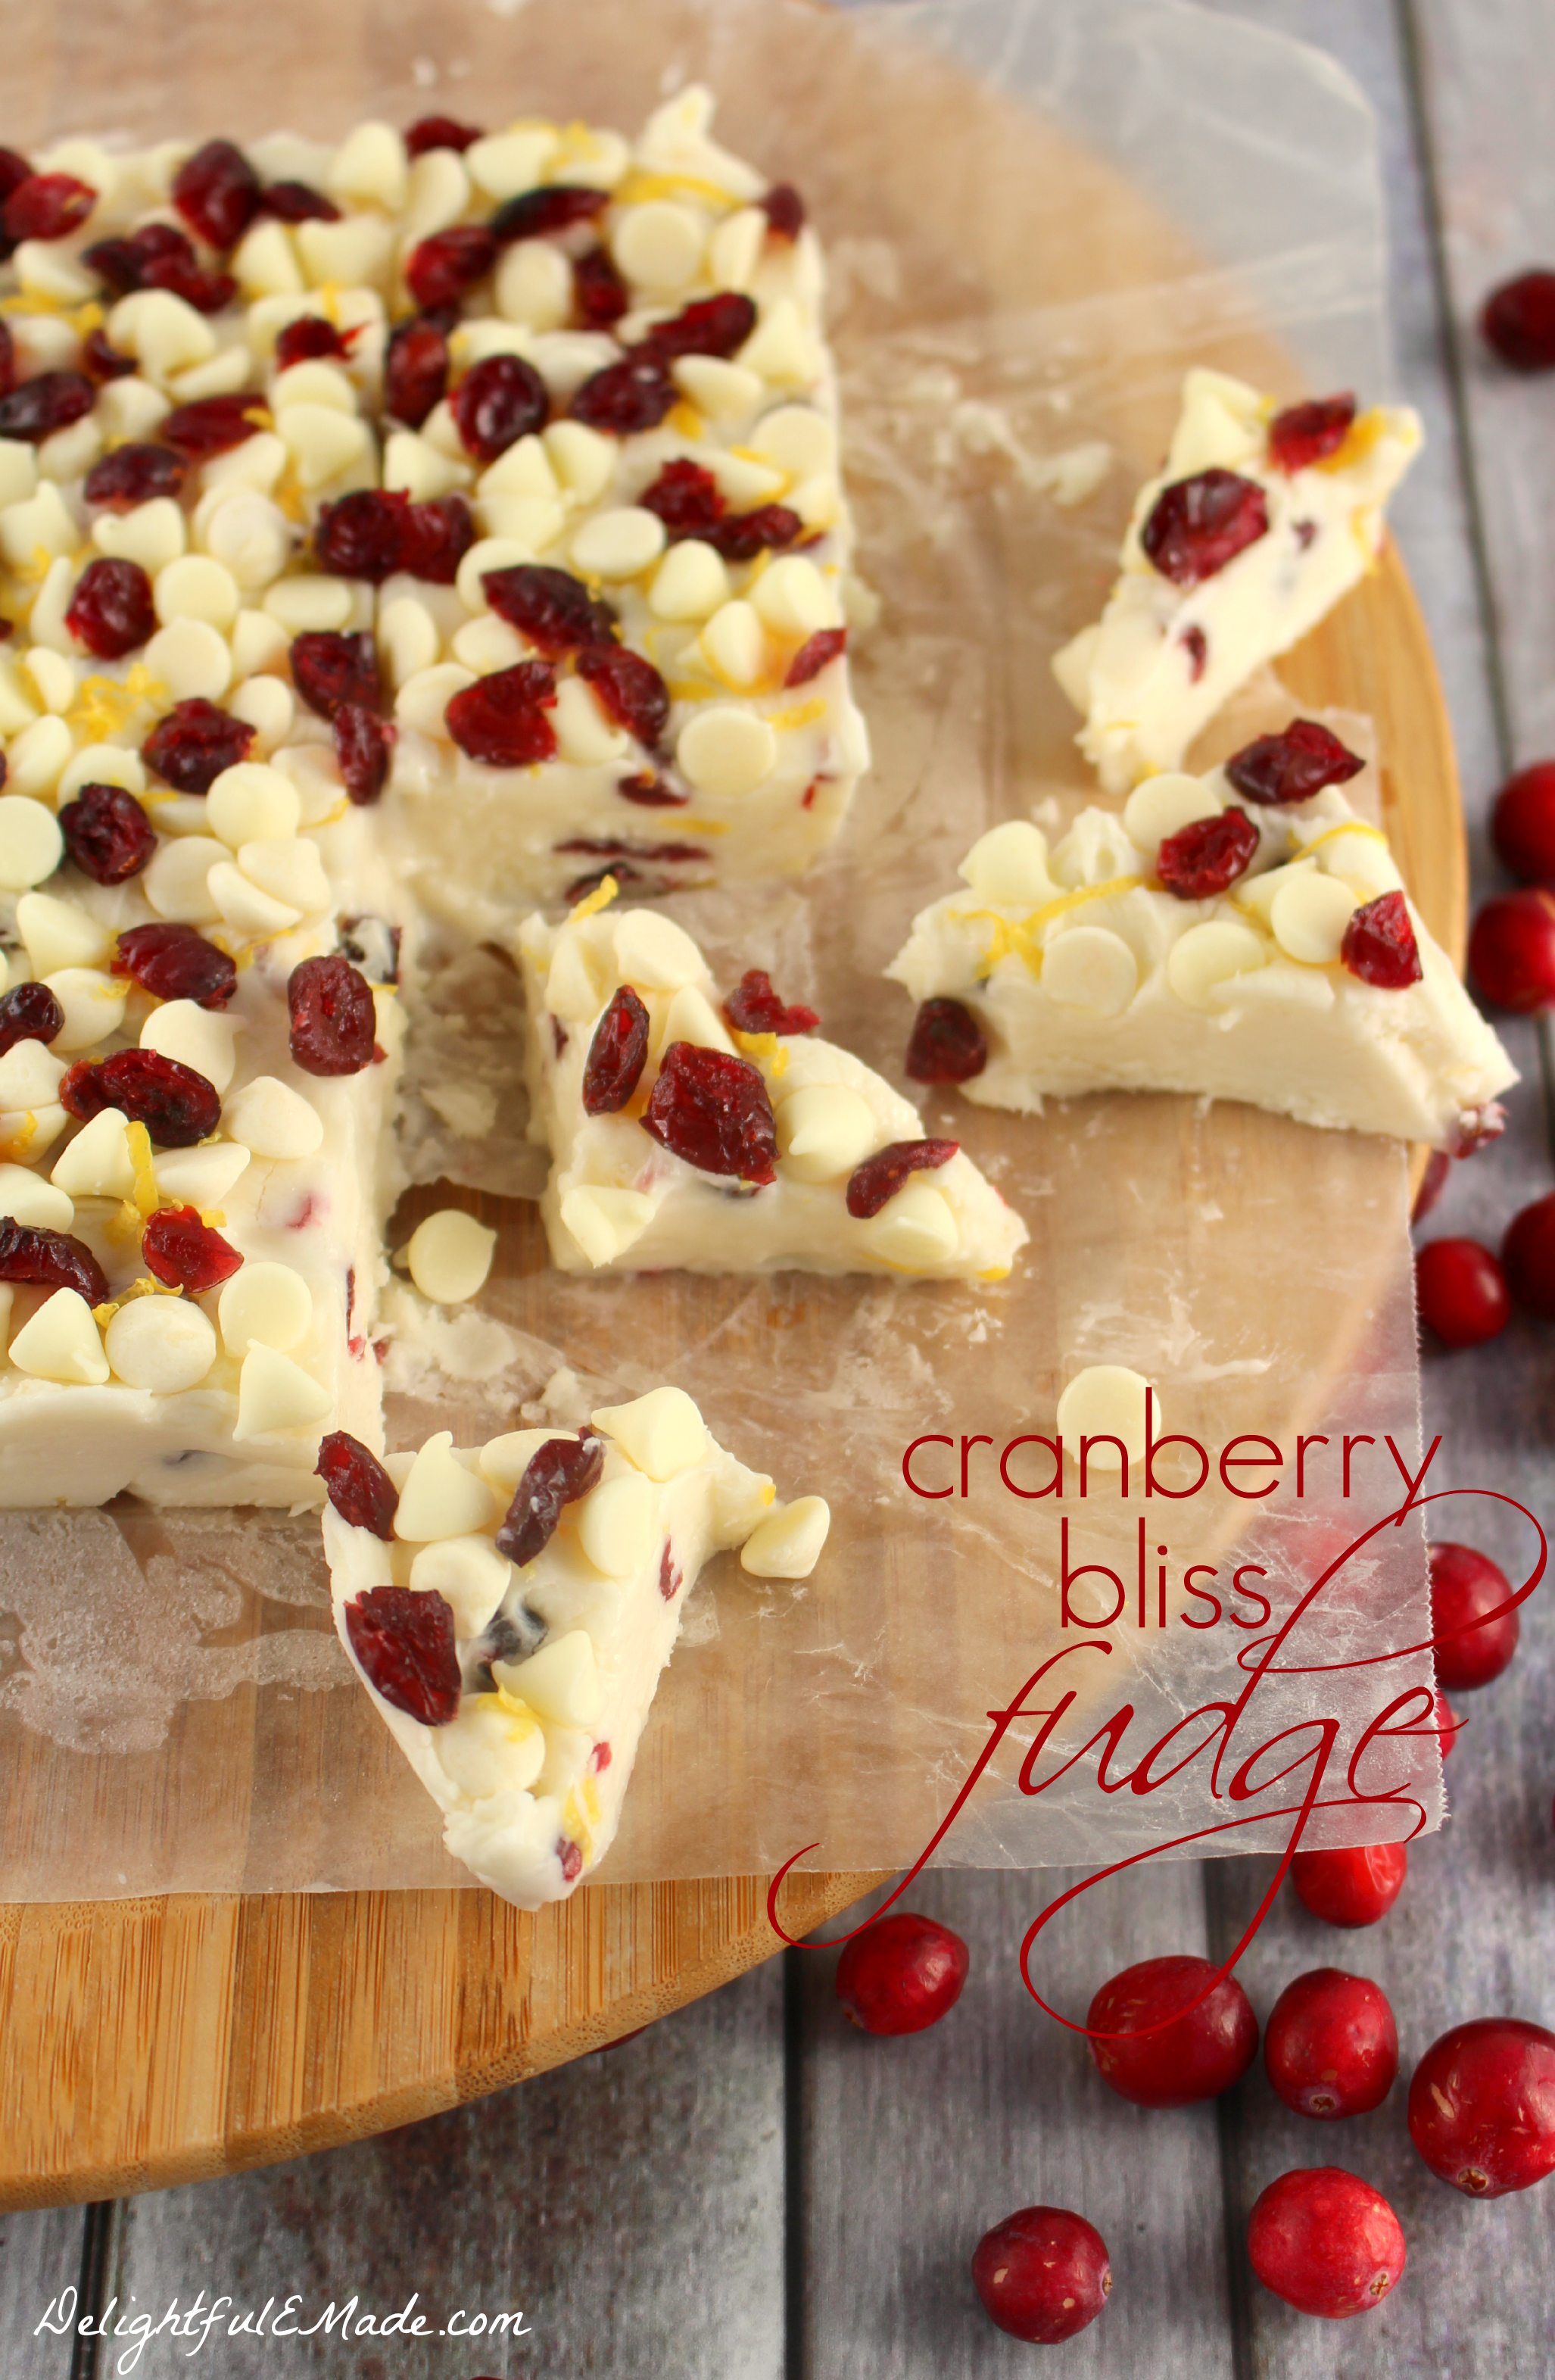 If you like the Starbucks Cranberry Bliss Bars, then you'll LOVE this Cranberry Bliss Fudge! Made with white chocolate, lemon zest, and bejeweled with cranberries, it will be your new favorite holiday treat. The perfect Christmas candy!